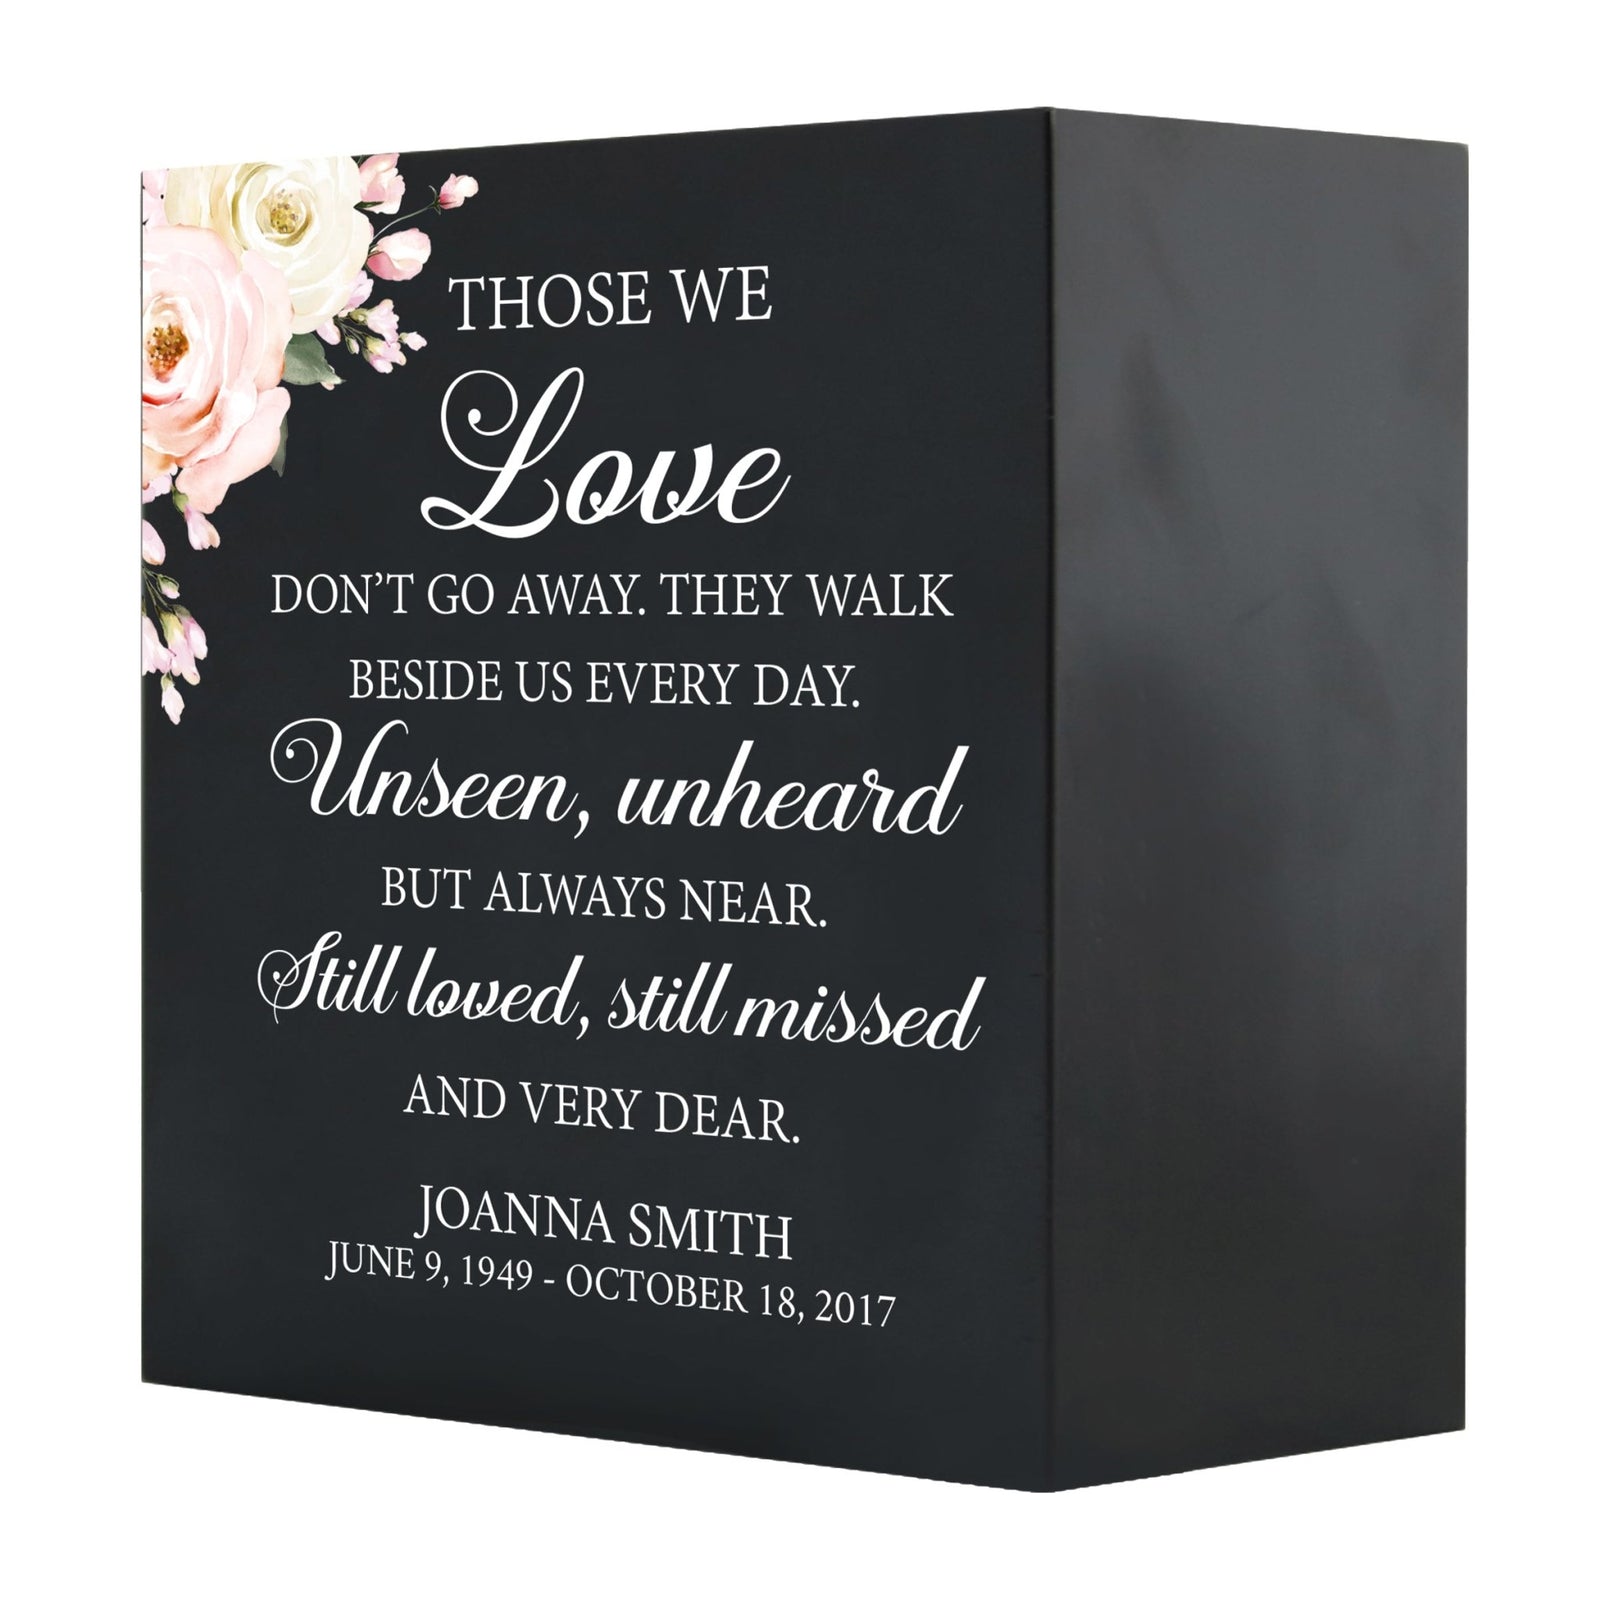 Personalized Modern Inspirational Memorial Wooden Shadow Box and Urn 6x6 holds 53 cu in of Human Ashes - Those We Love Don’t Go (Black) - LifeSong Milestones